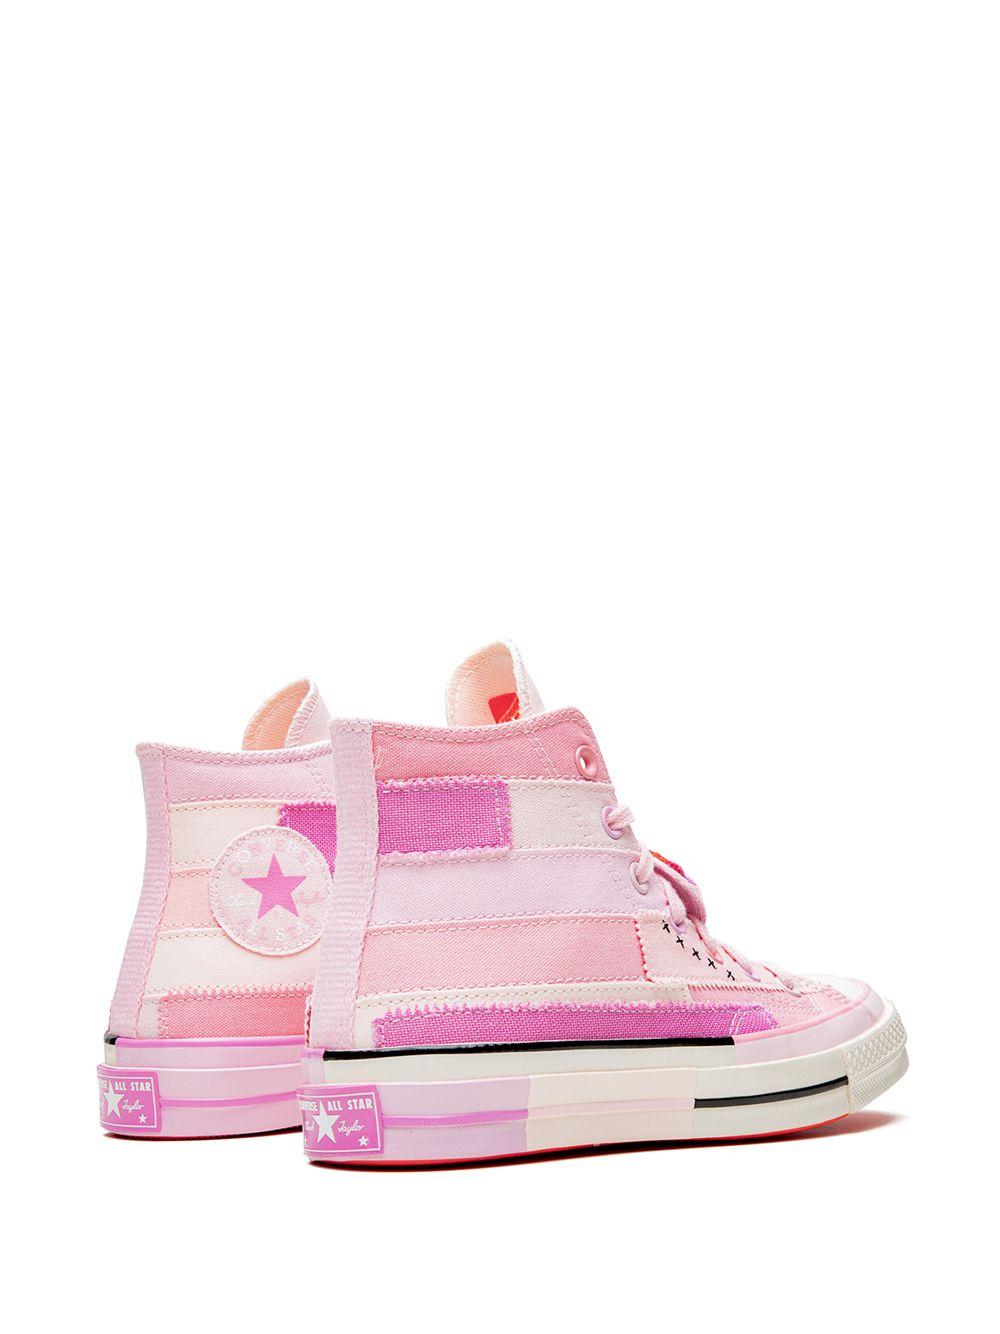 Converse X Millie Bobby Brown Chuck 70 Hi Petal Pink Sneakers for Men | Lyst